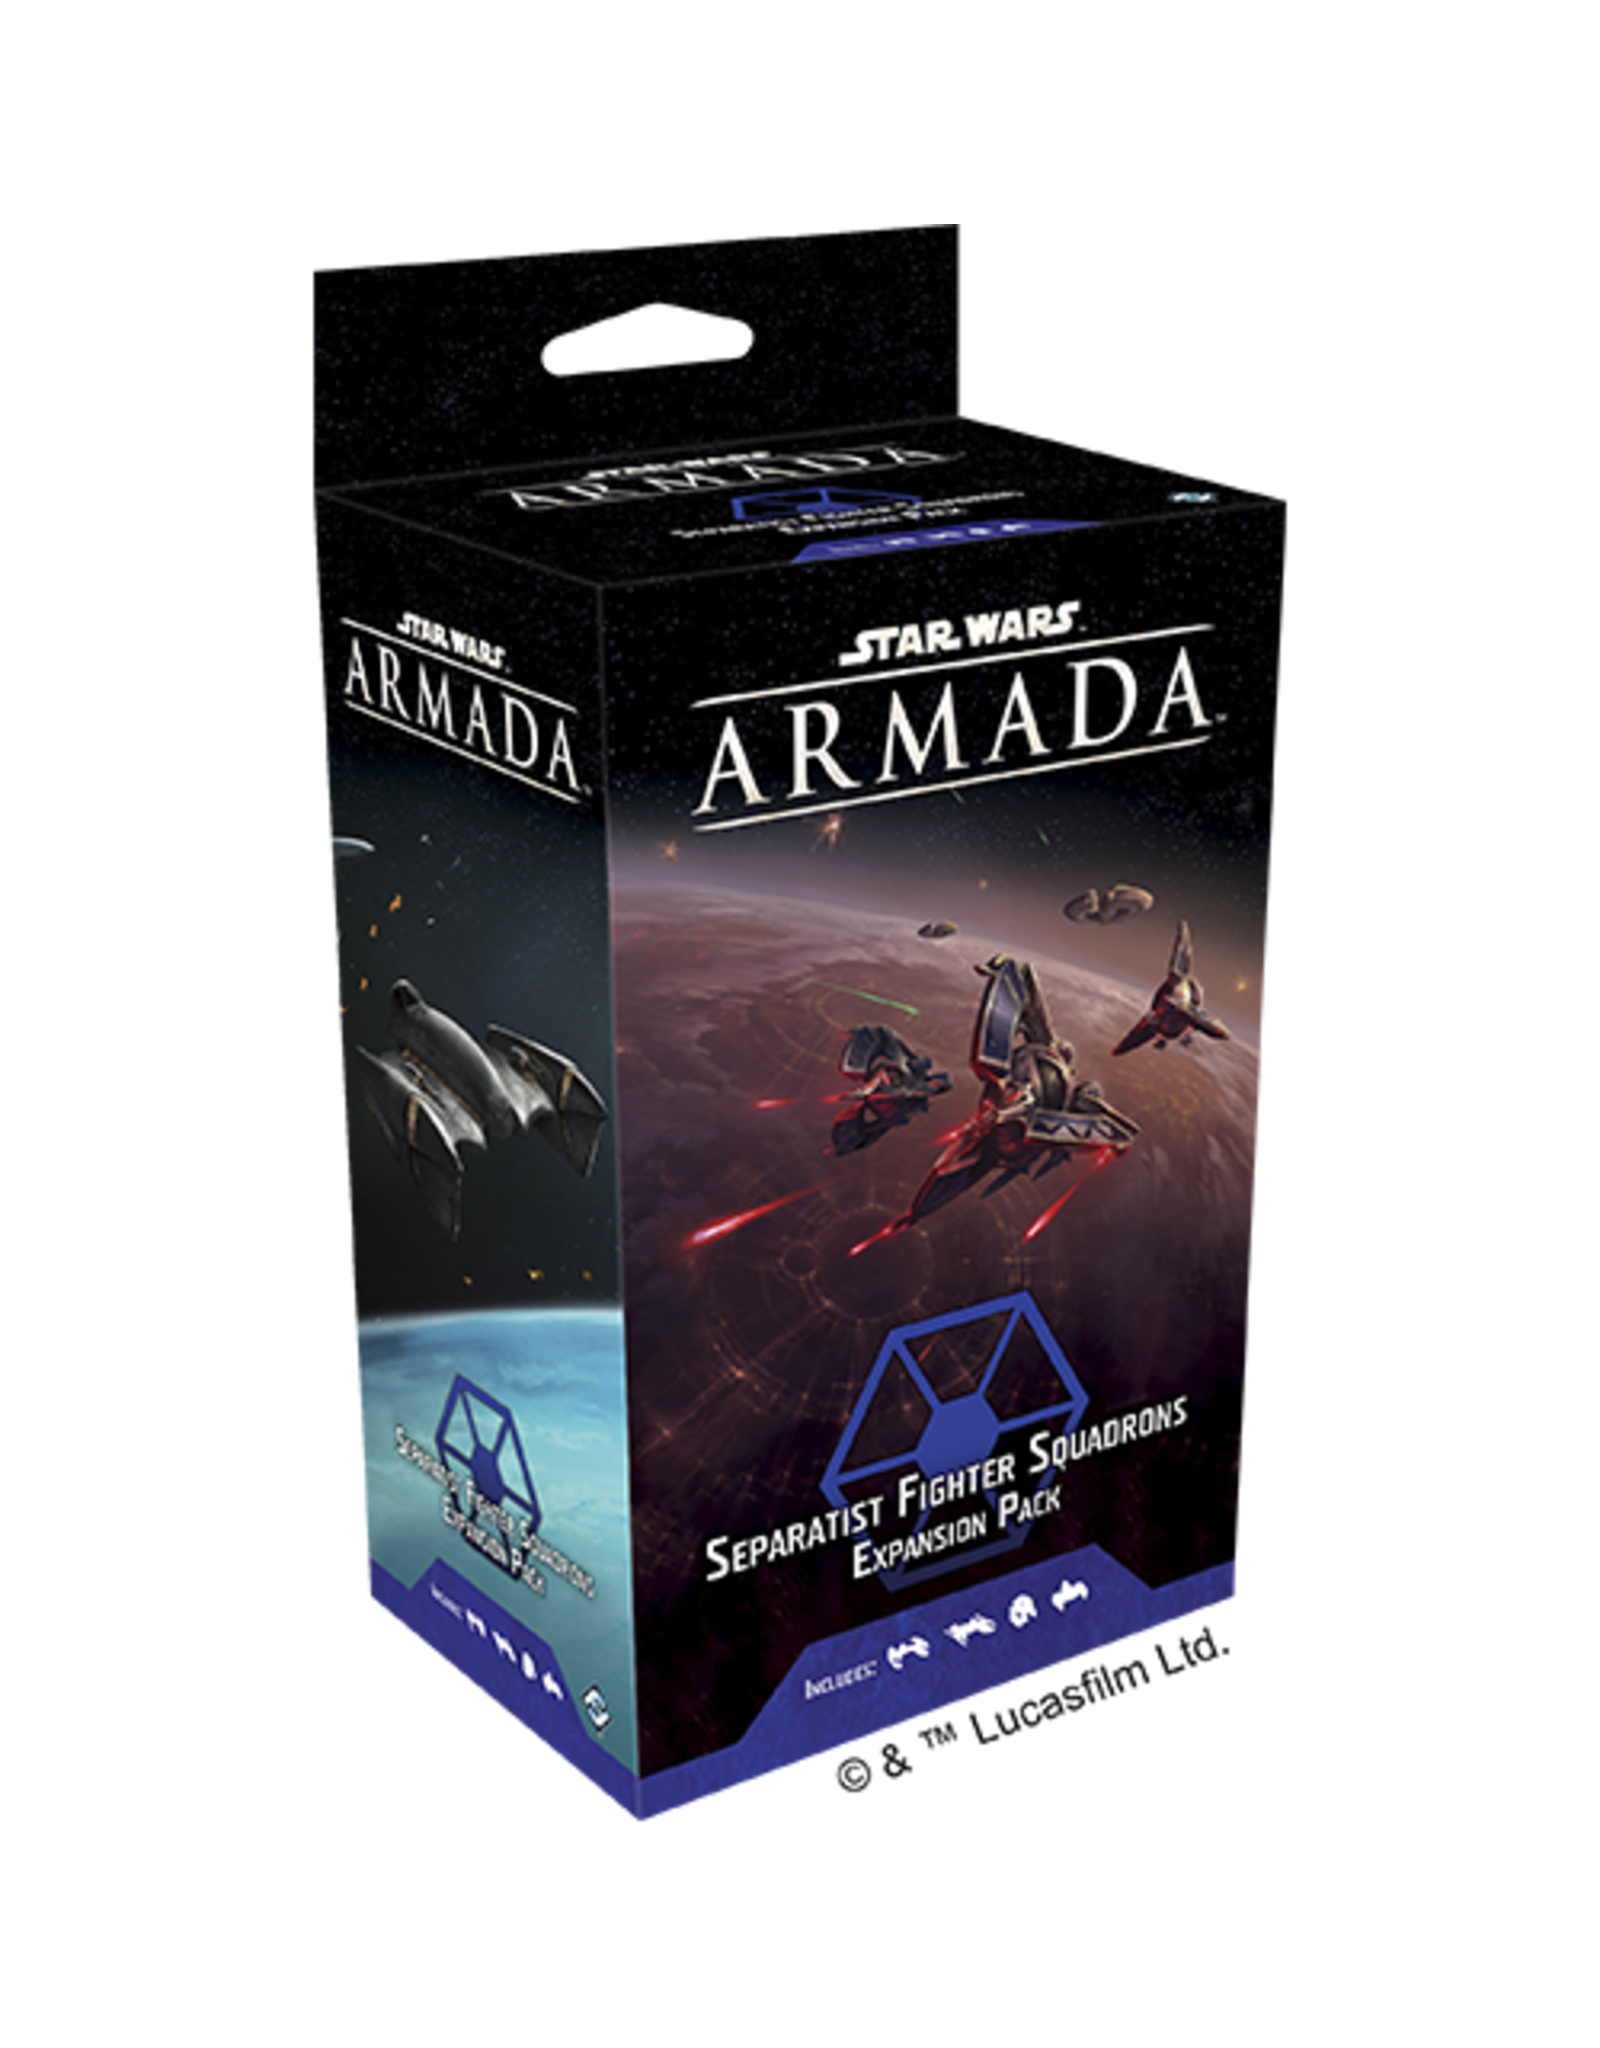 Fantasy Flight Games SW:A Separatist Fighter Squadrons Expansion Pack